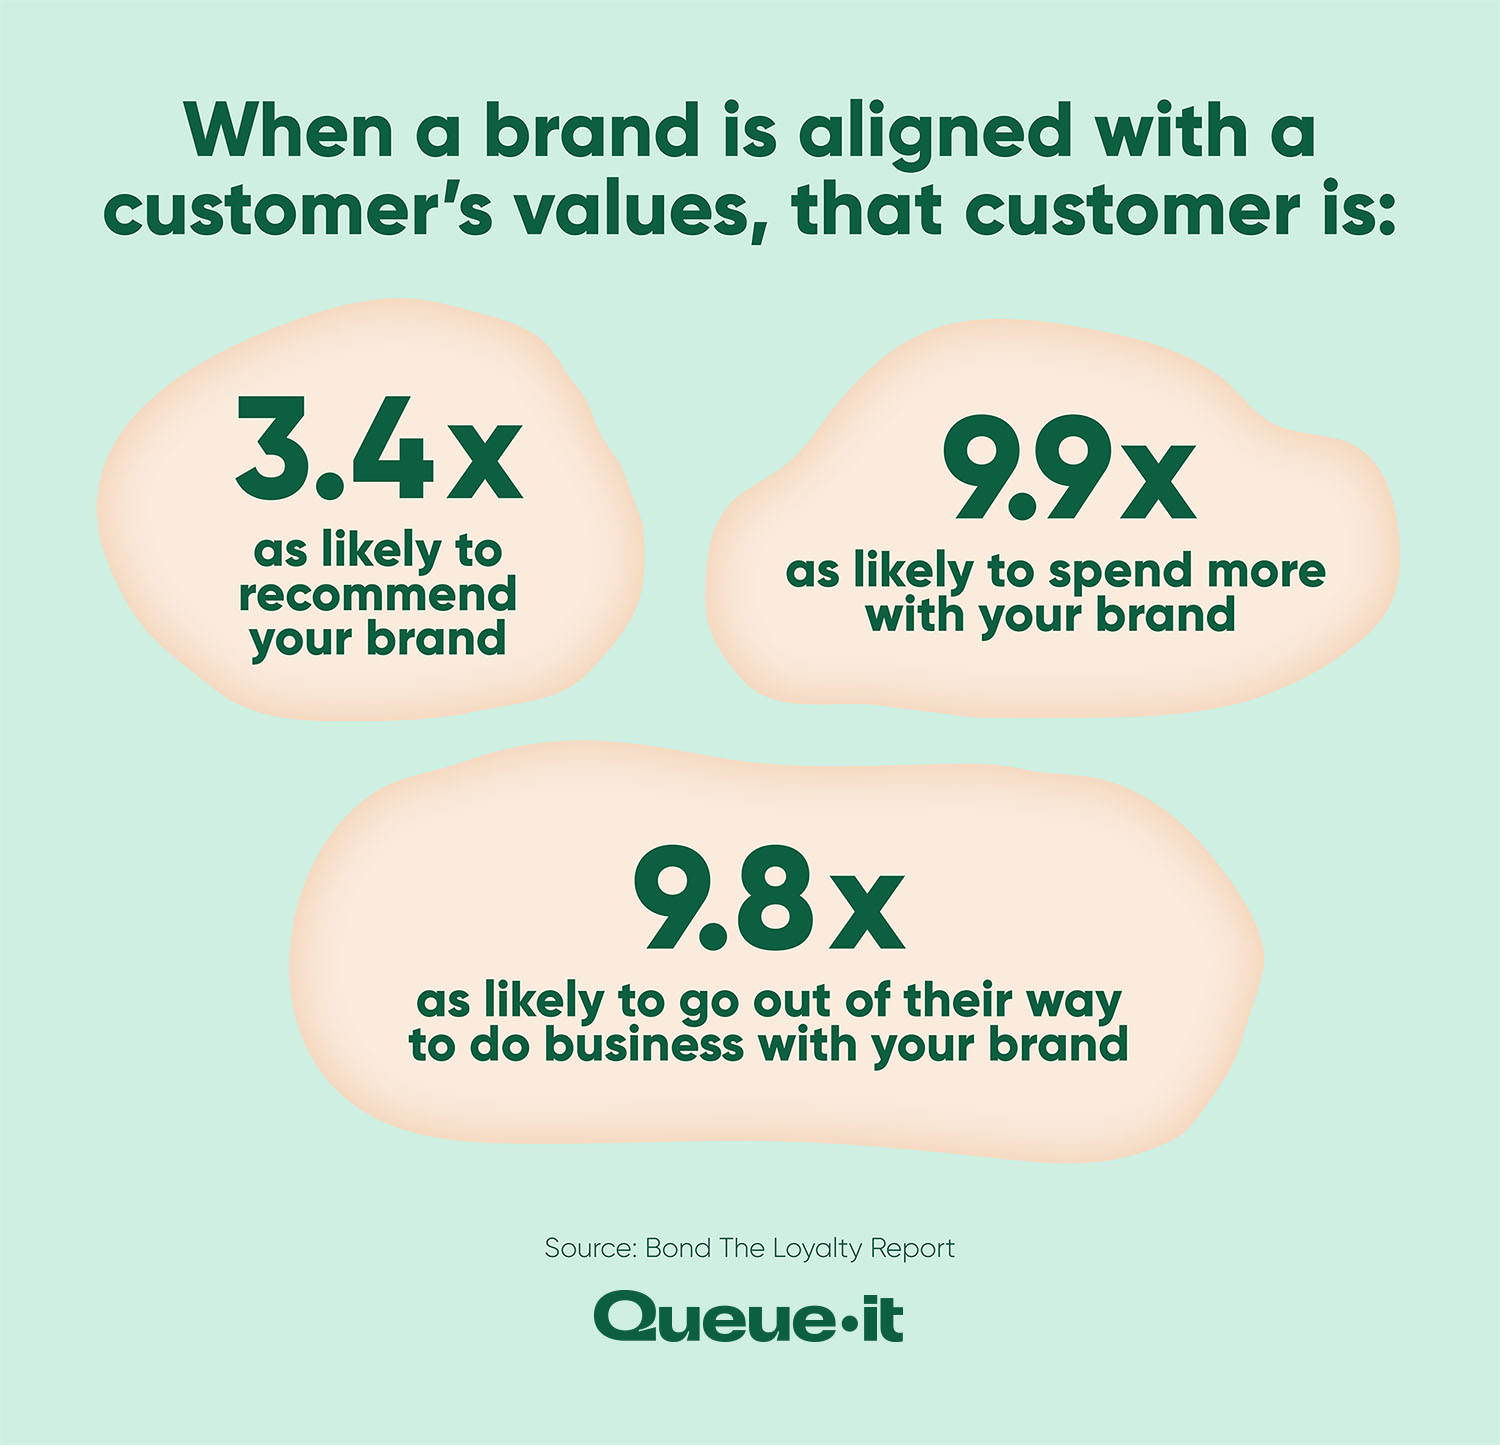 The impact of brand values on loyalty